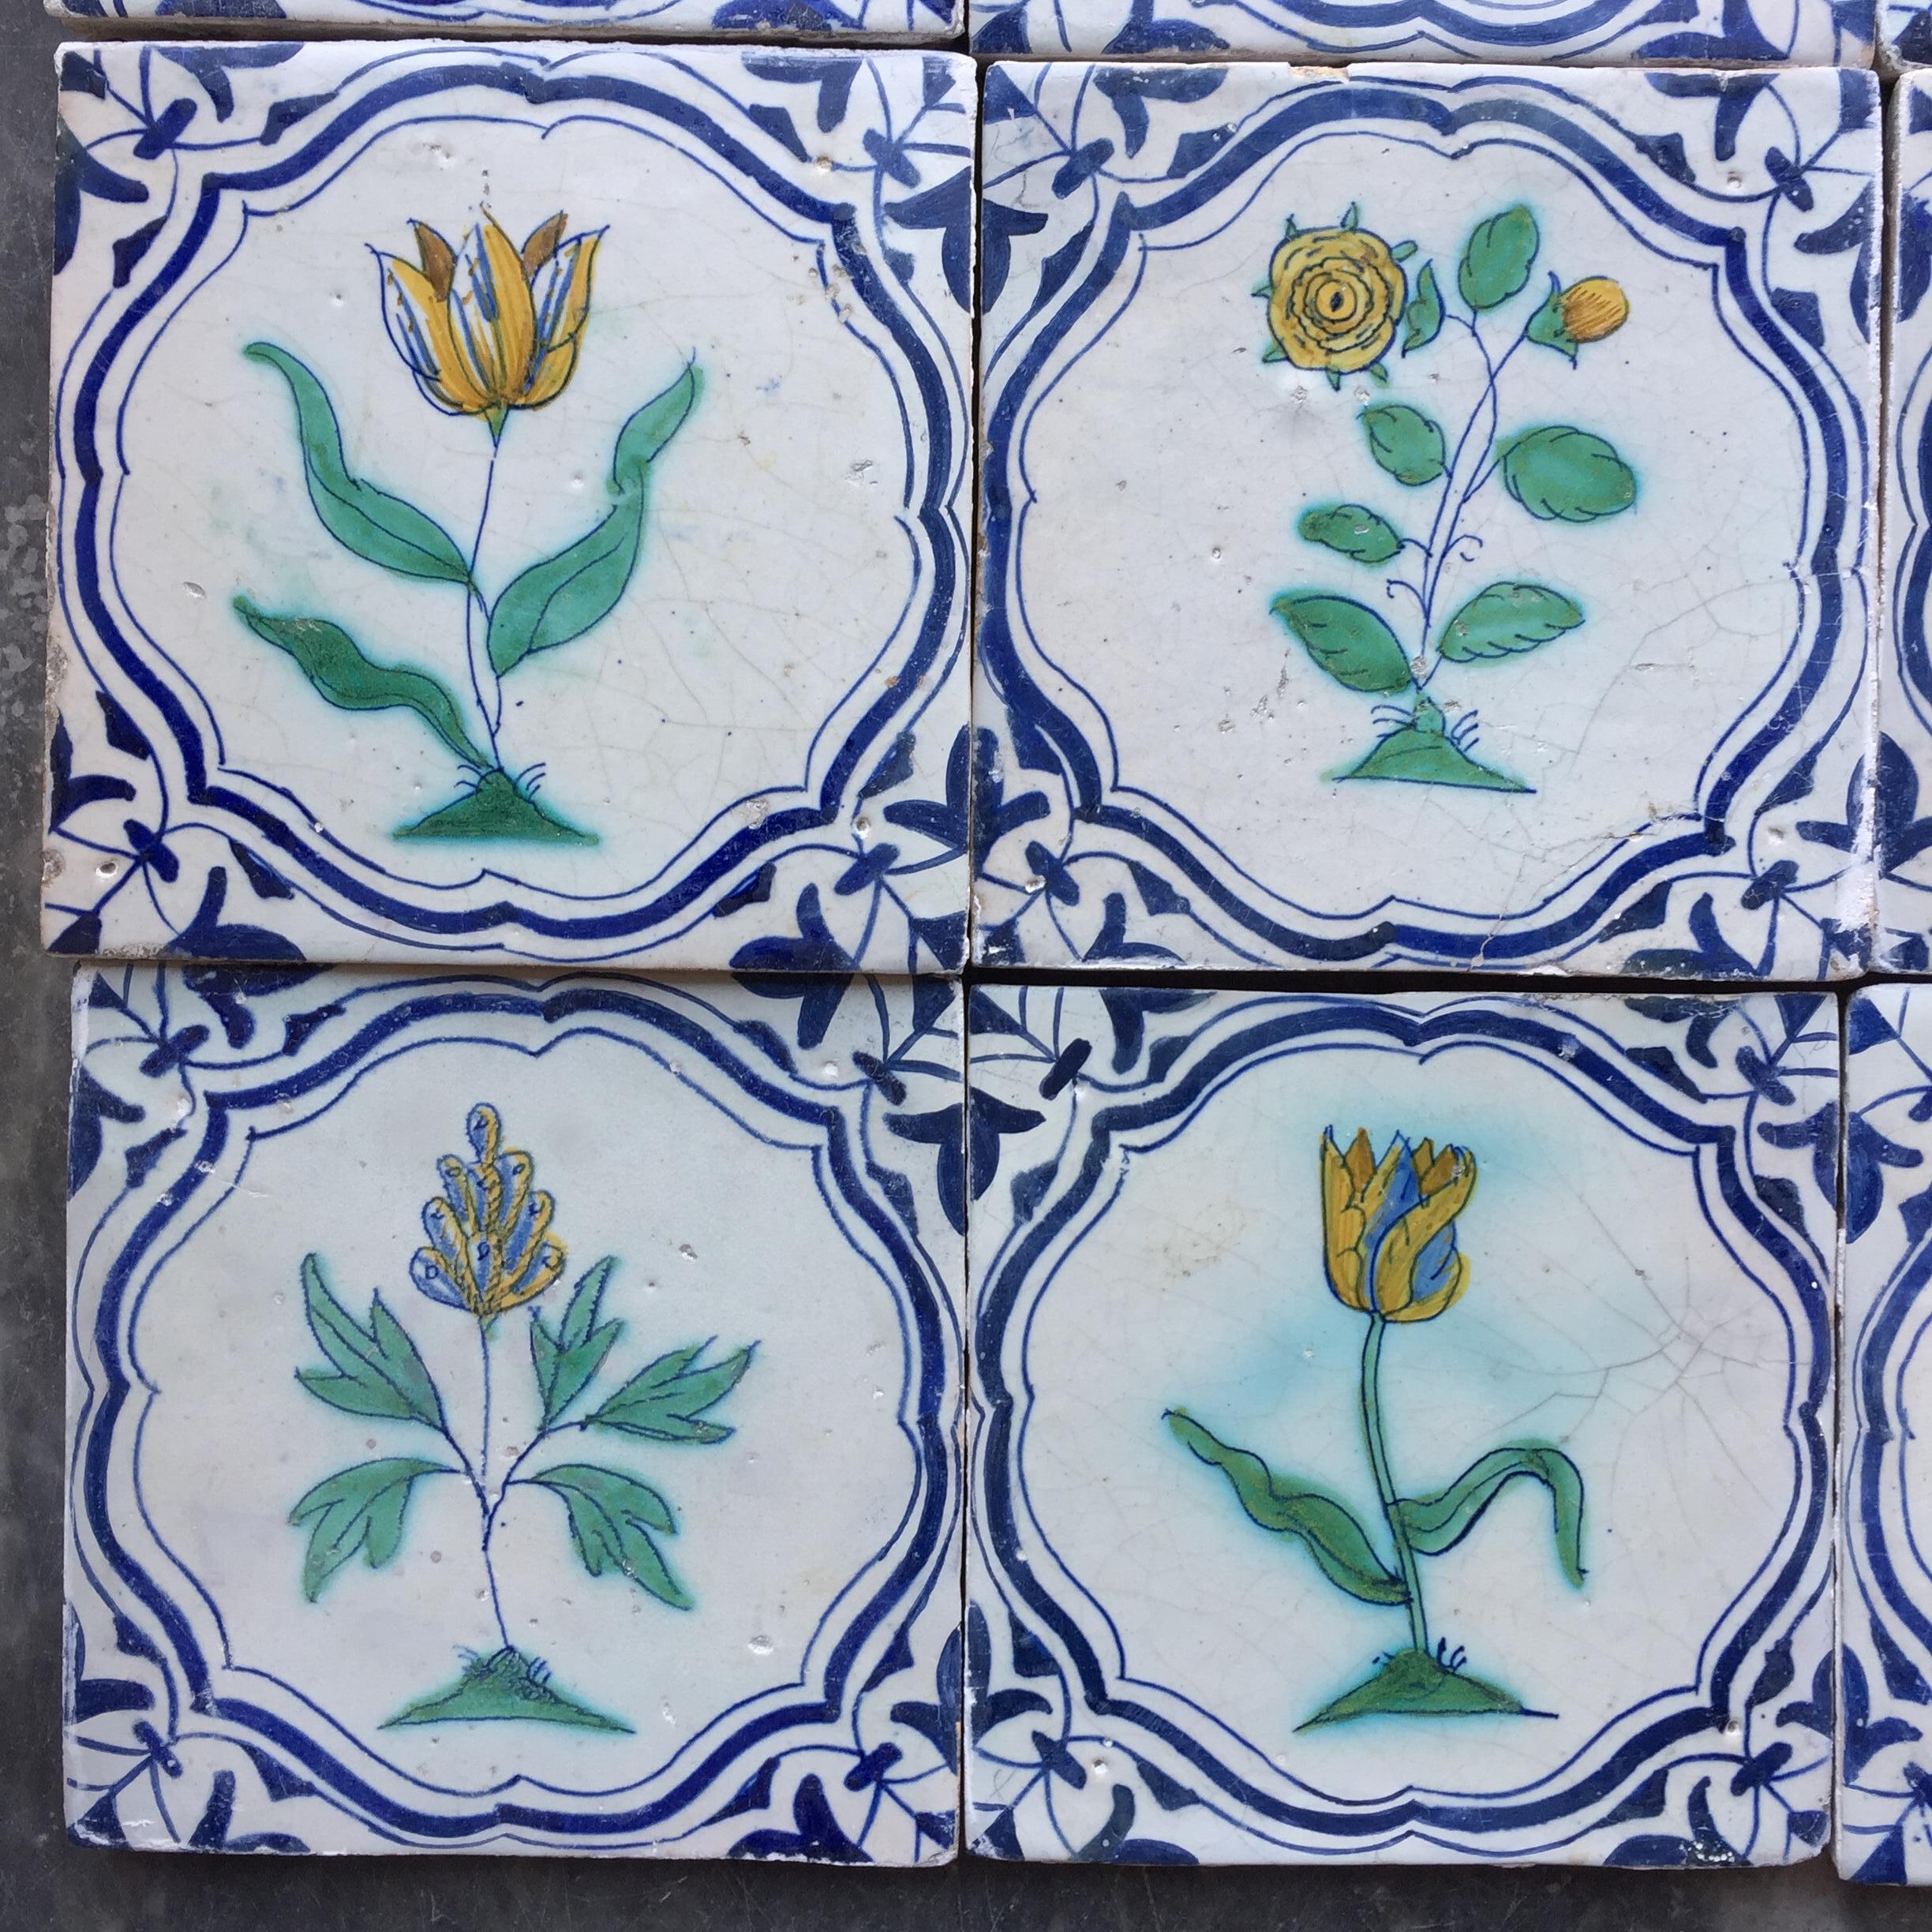 Ceramic Important and Rare Set of Dutch Delft Tiles with Flowers, Early 17th Century